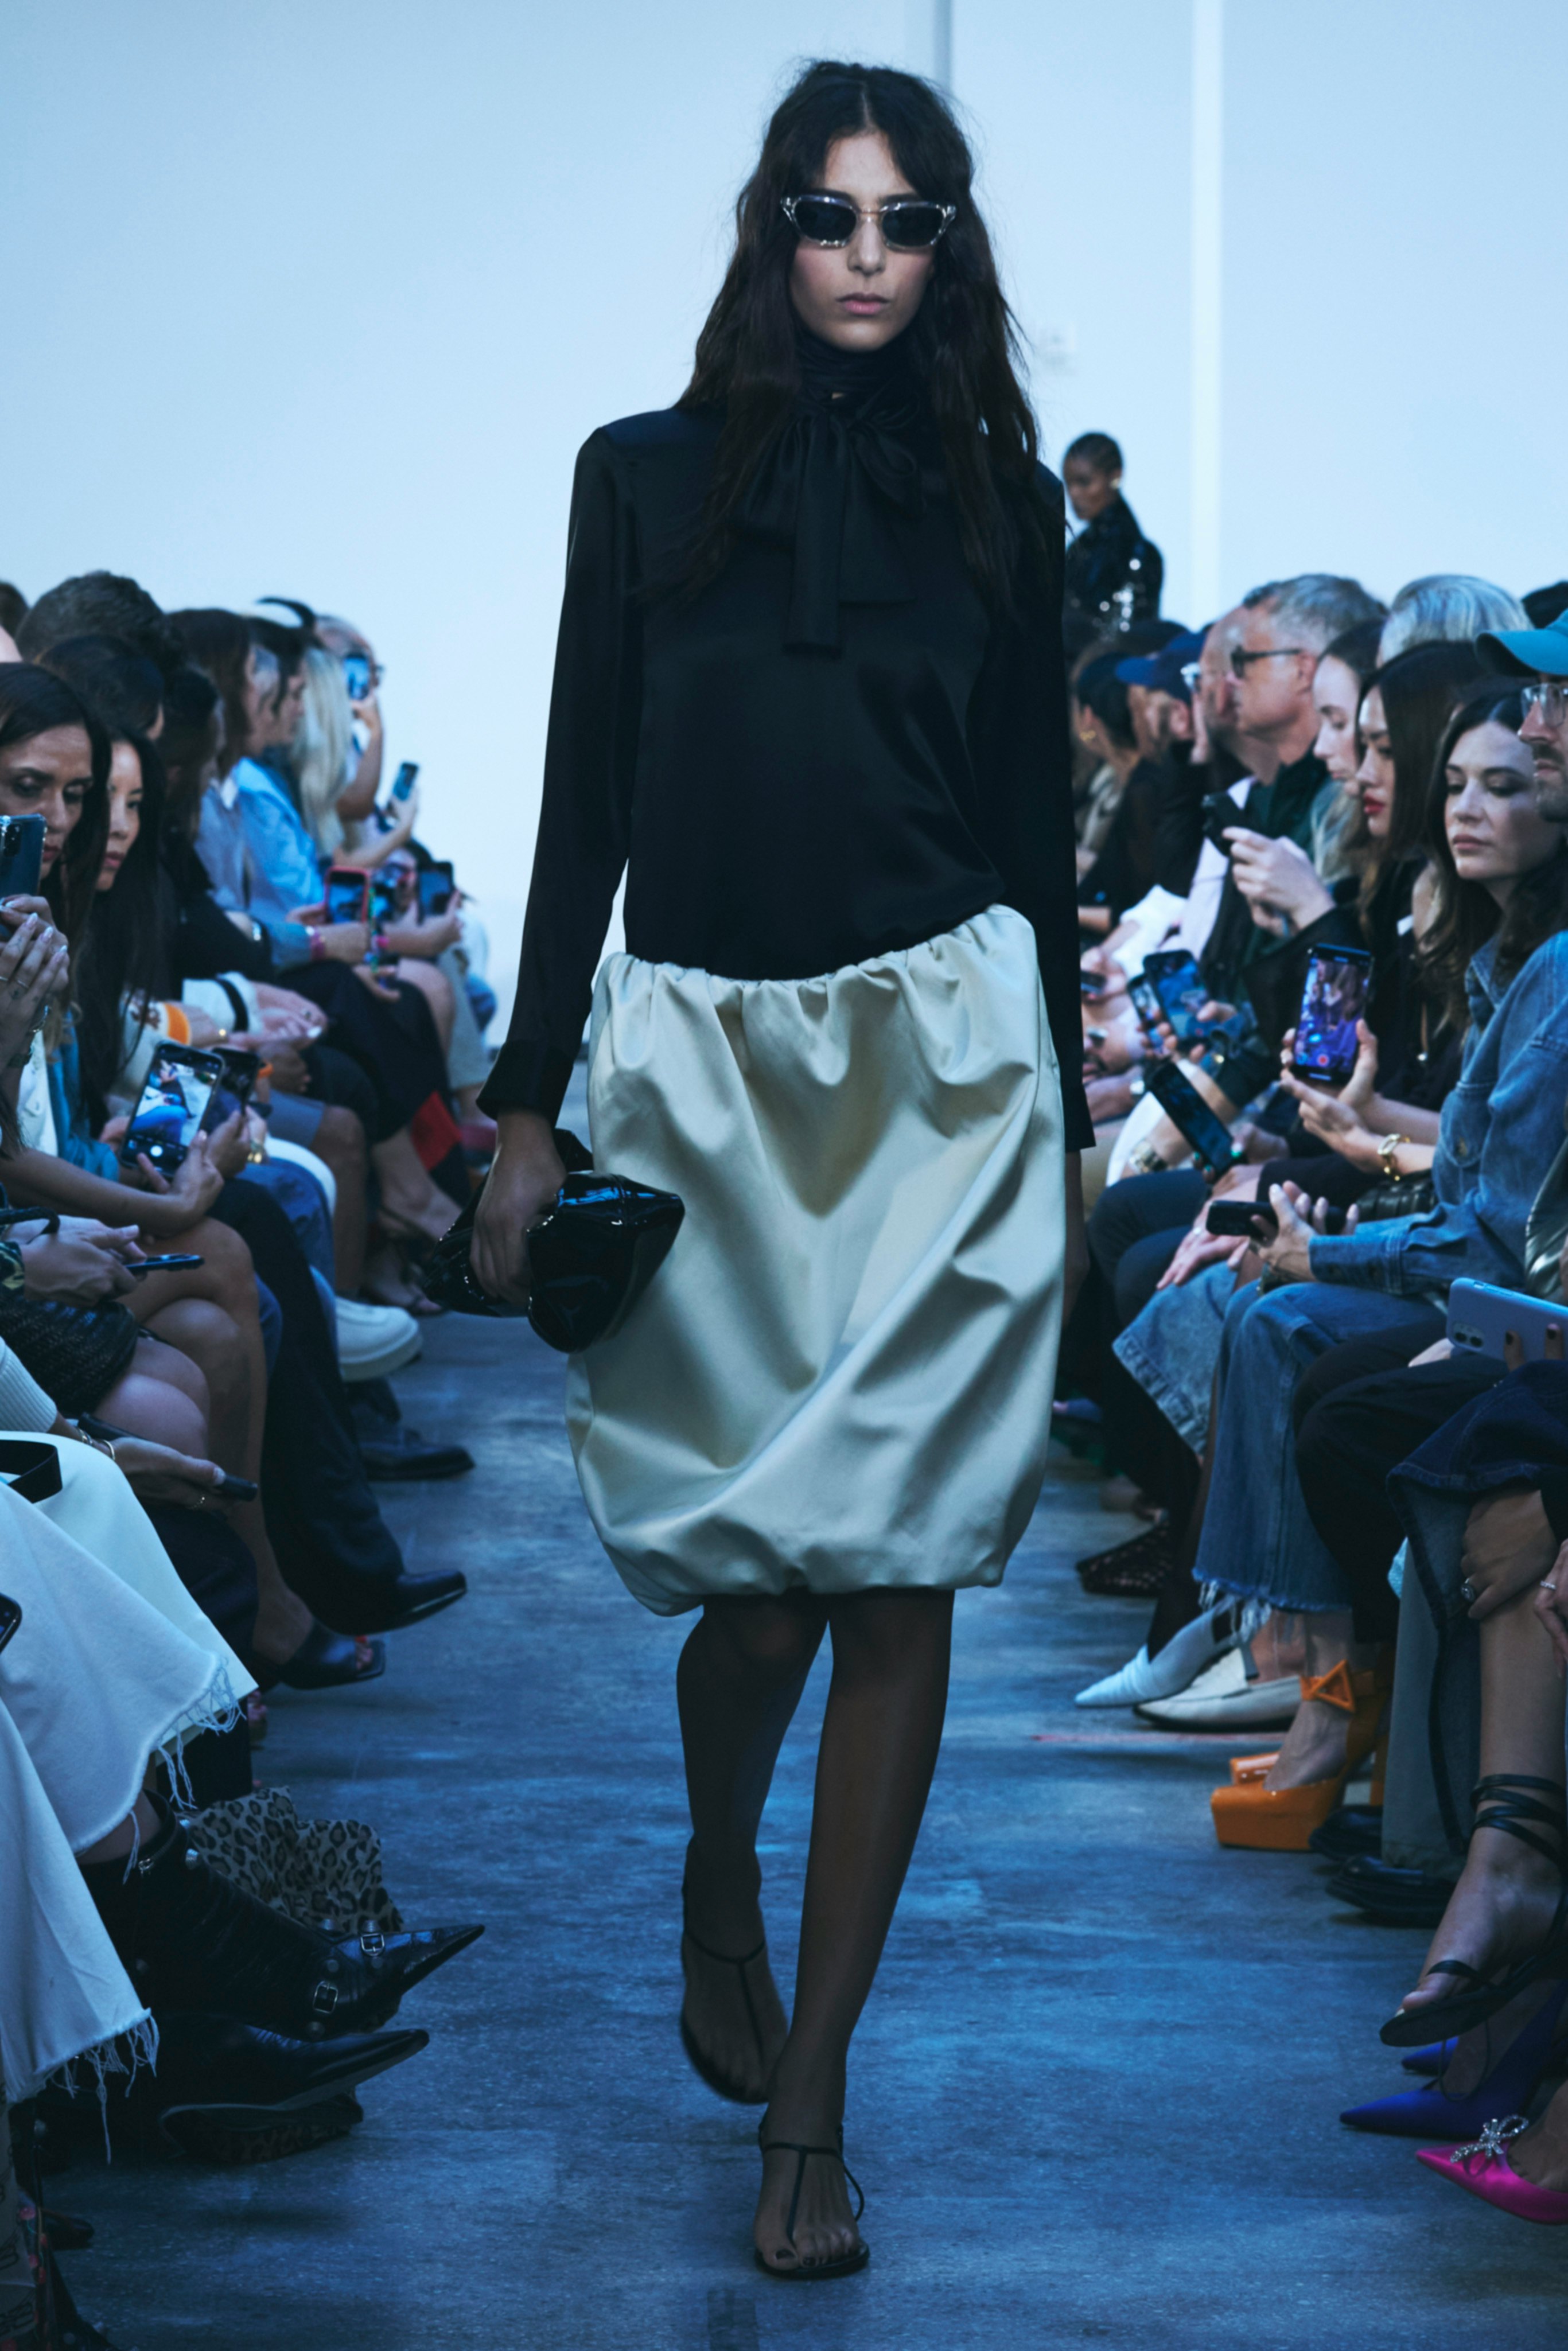 The Bubble Hem Trend Has Fully Manifested On The NYFW Runways